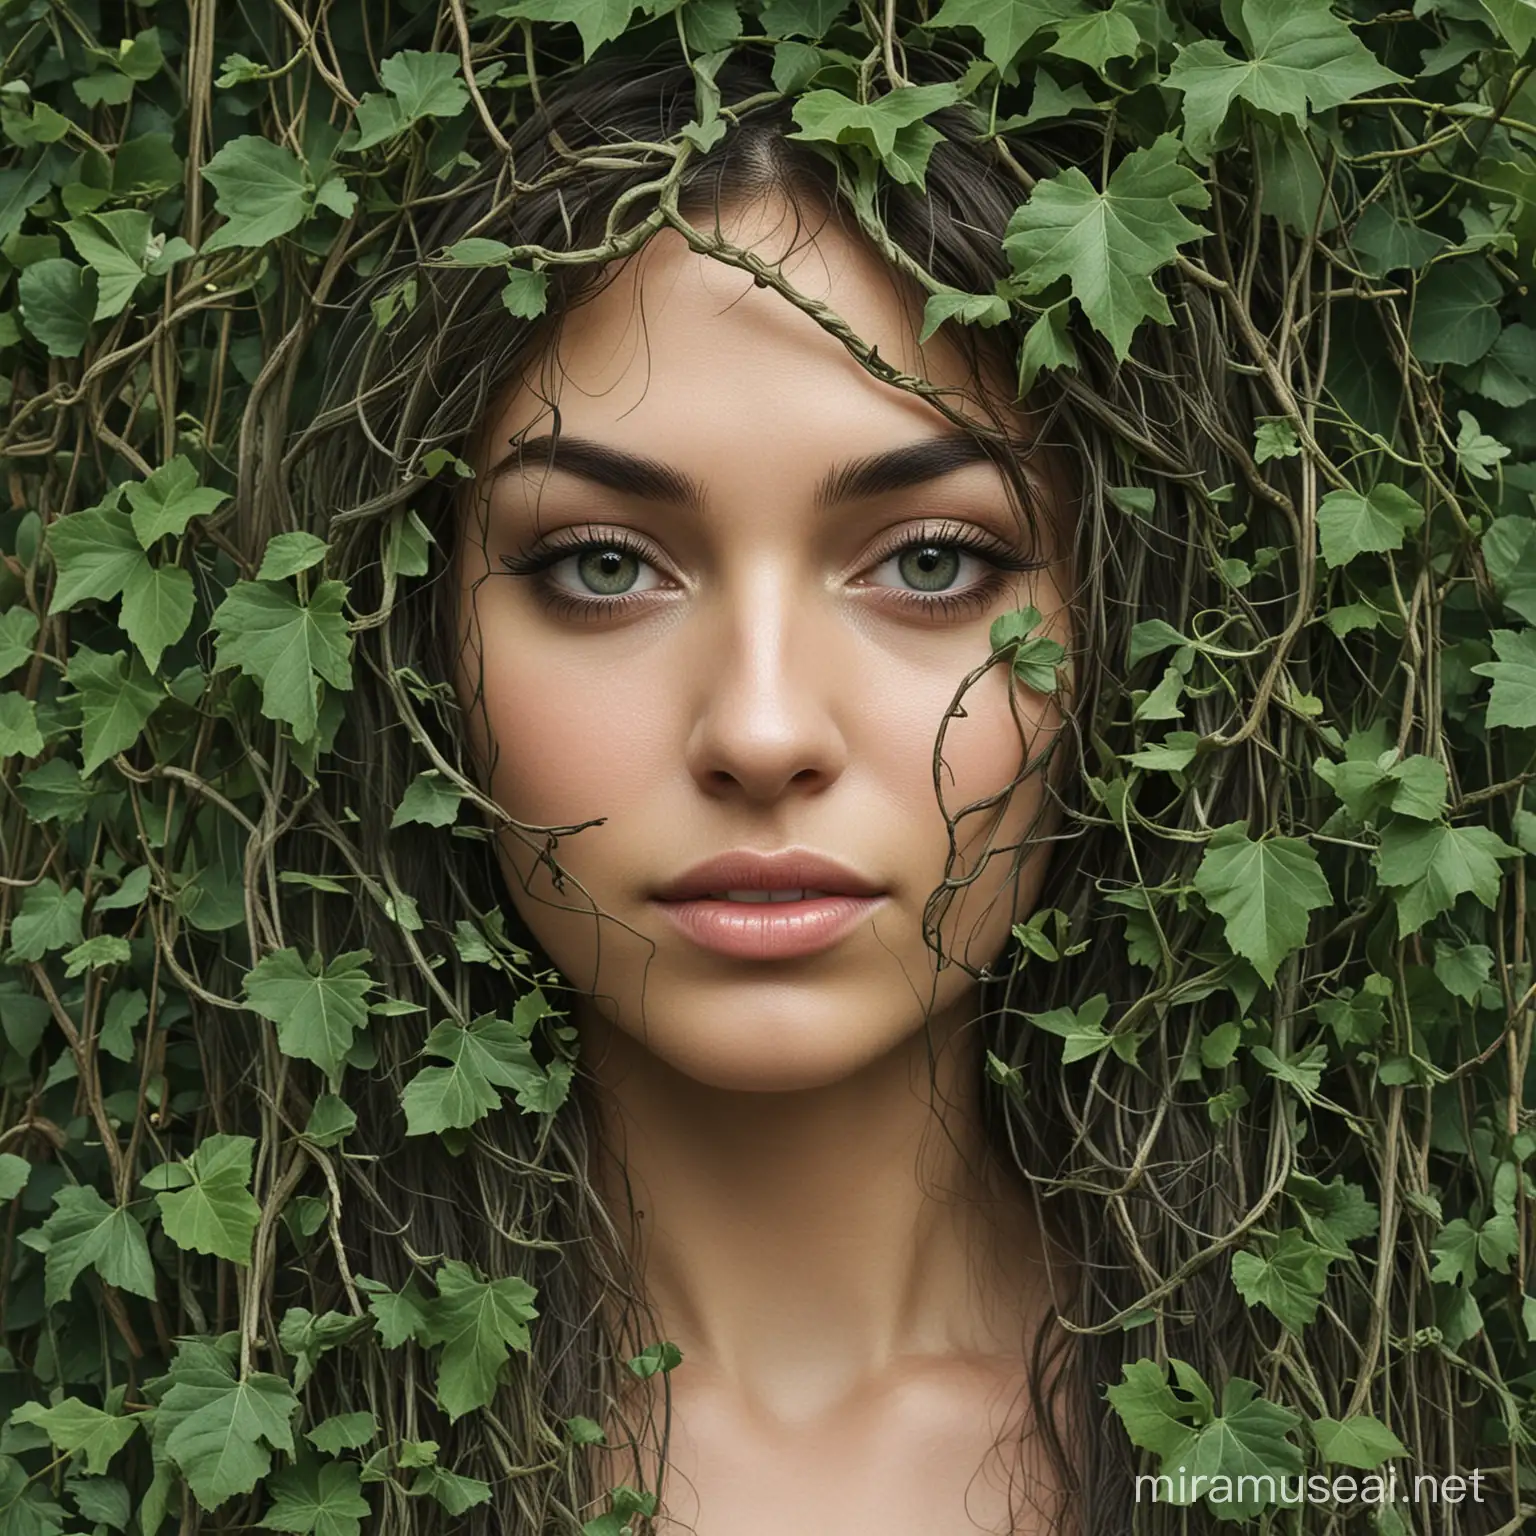 Vines Forming Intricate Female Face Art